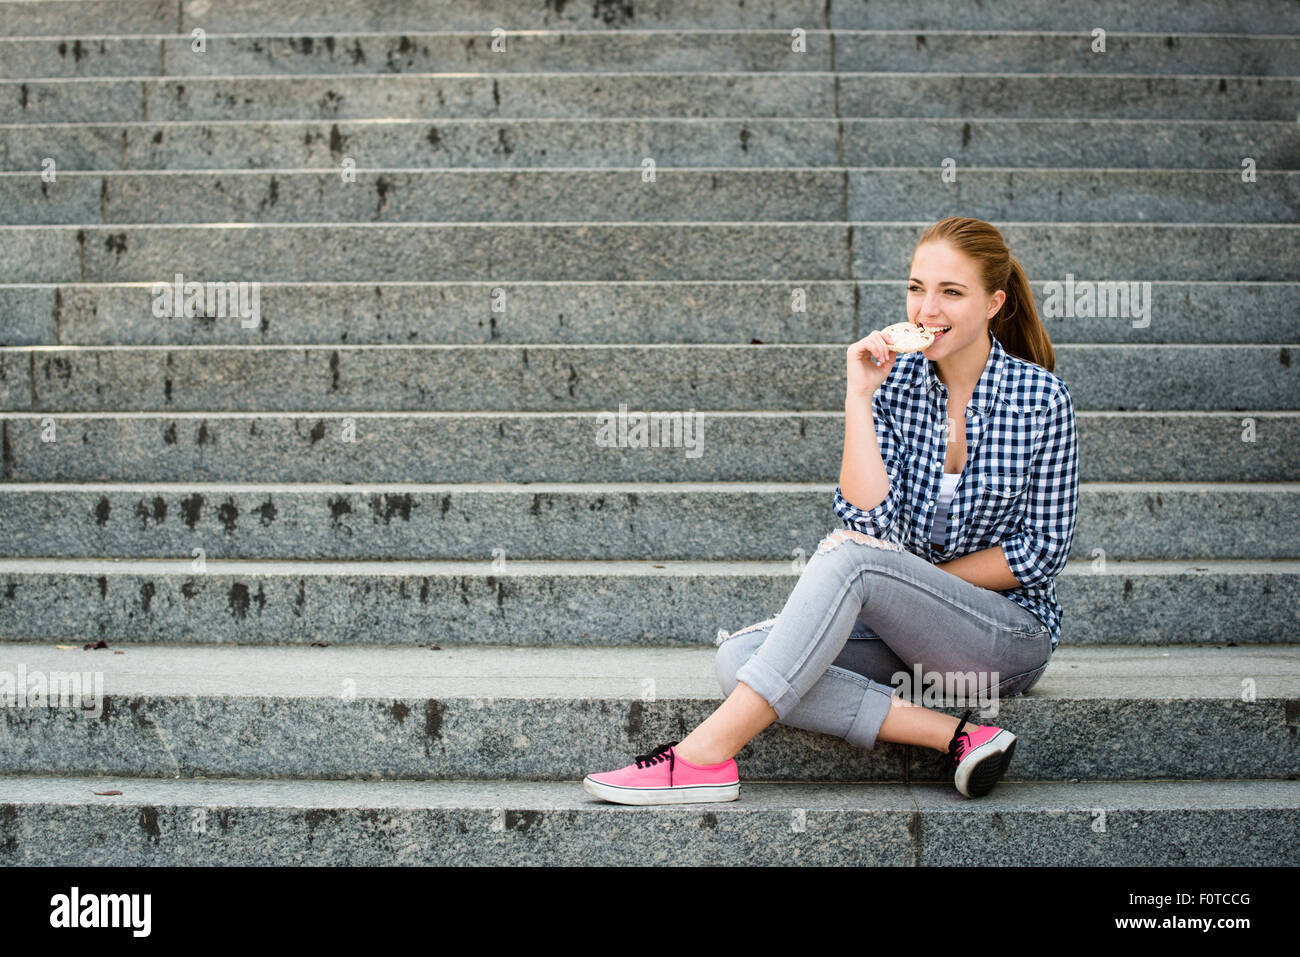 Healthy lifestyle  - teenager eating puffed bread outdoor sitting on stairs Stock Photo